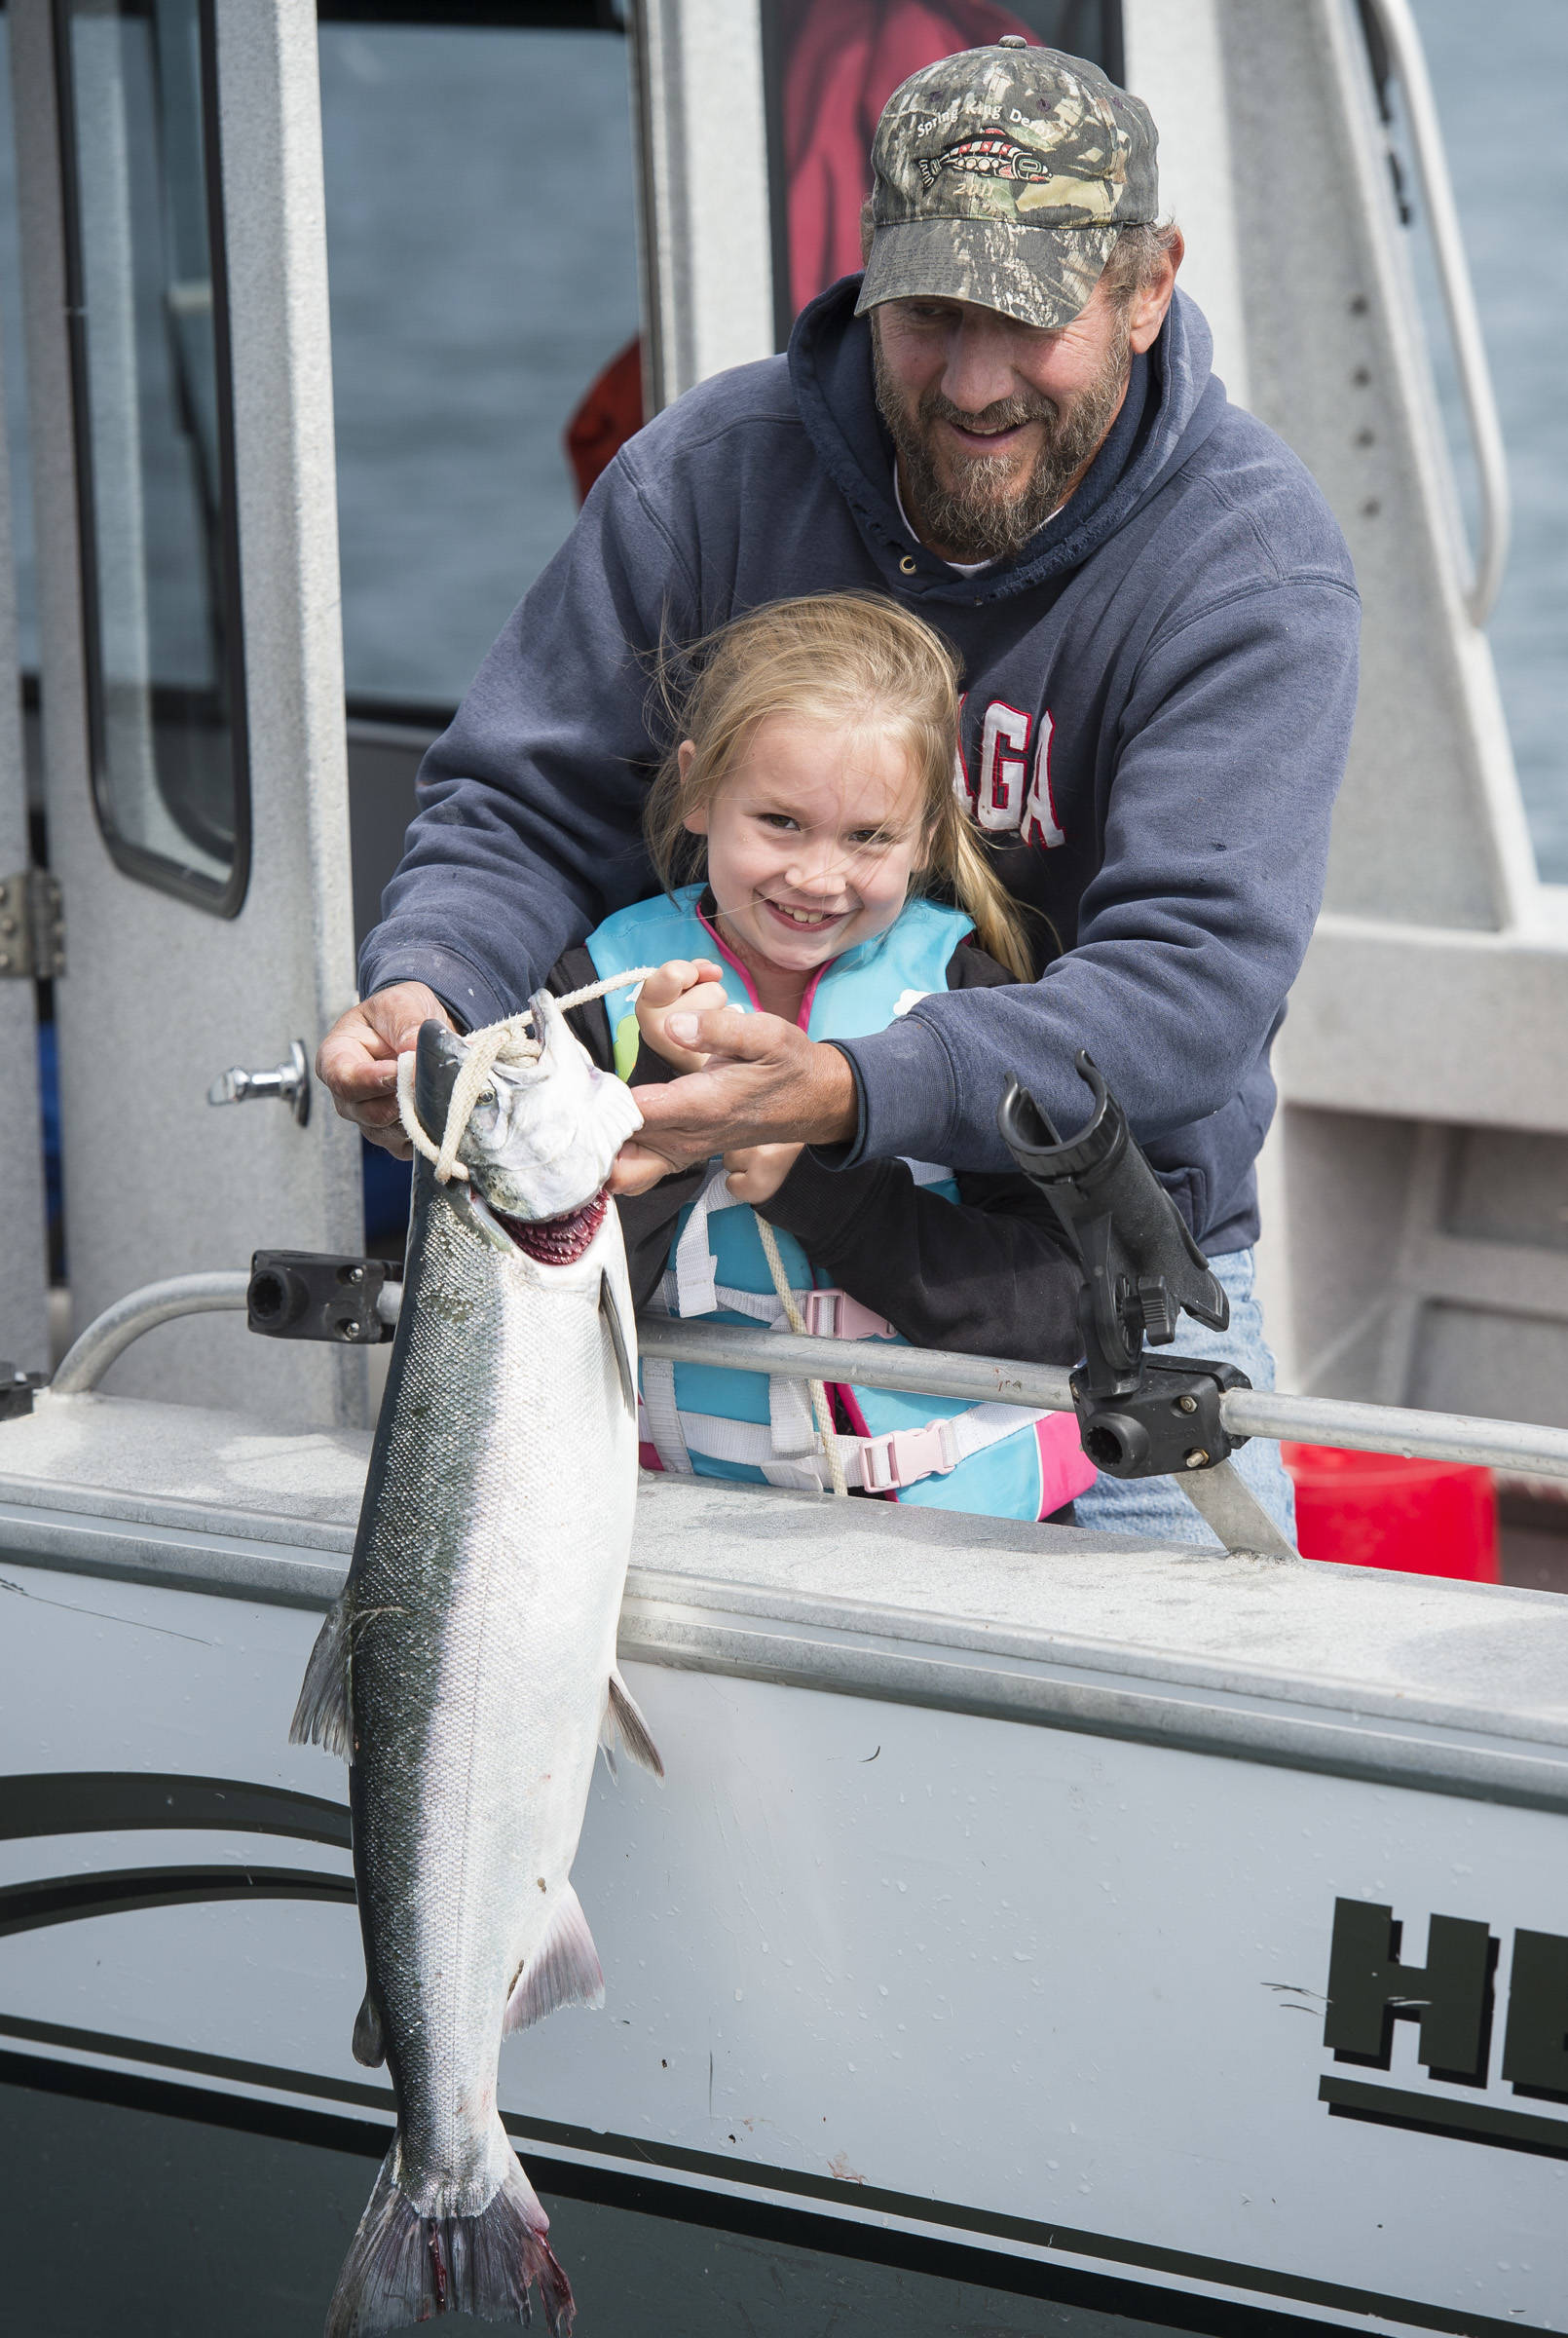 Lily Abby, 7, gets help holding up a silver salmon by her grandfather, Scott Guenther during the 72nd Annual Golden North Salmon Derby on Friday, August 17, 2018, sponsored by the Territorial Sportsmen. (Michael Penn | Juneau Empire)